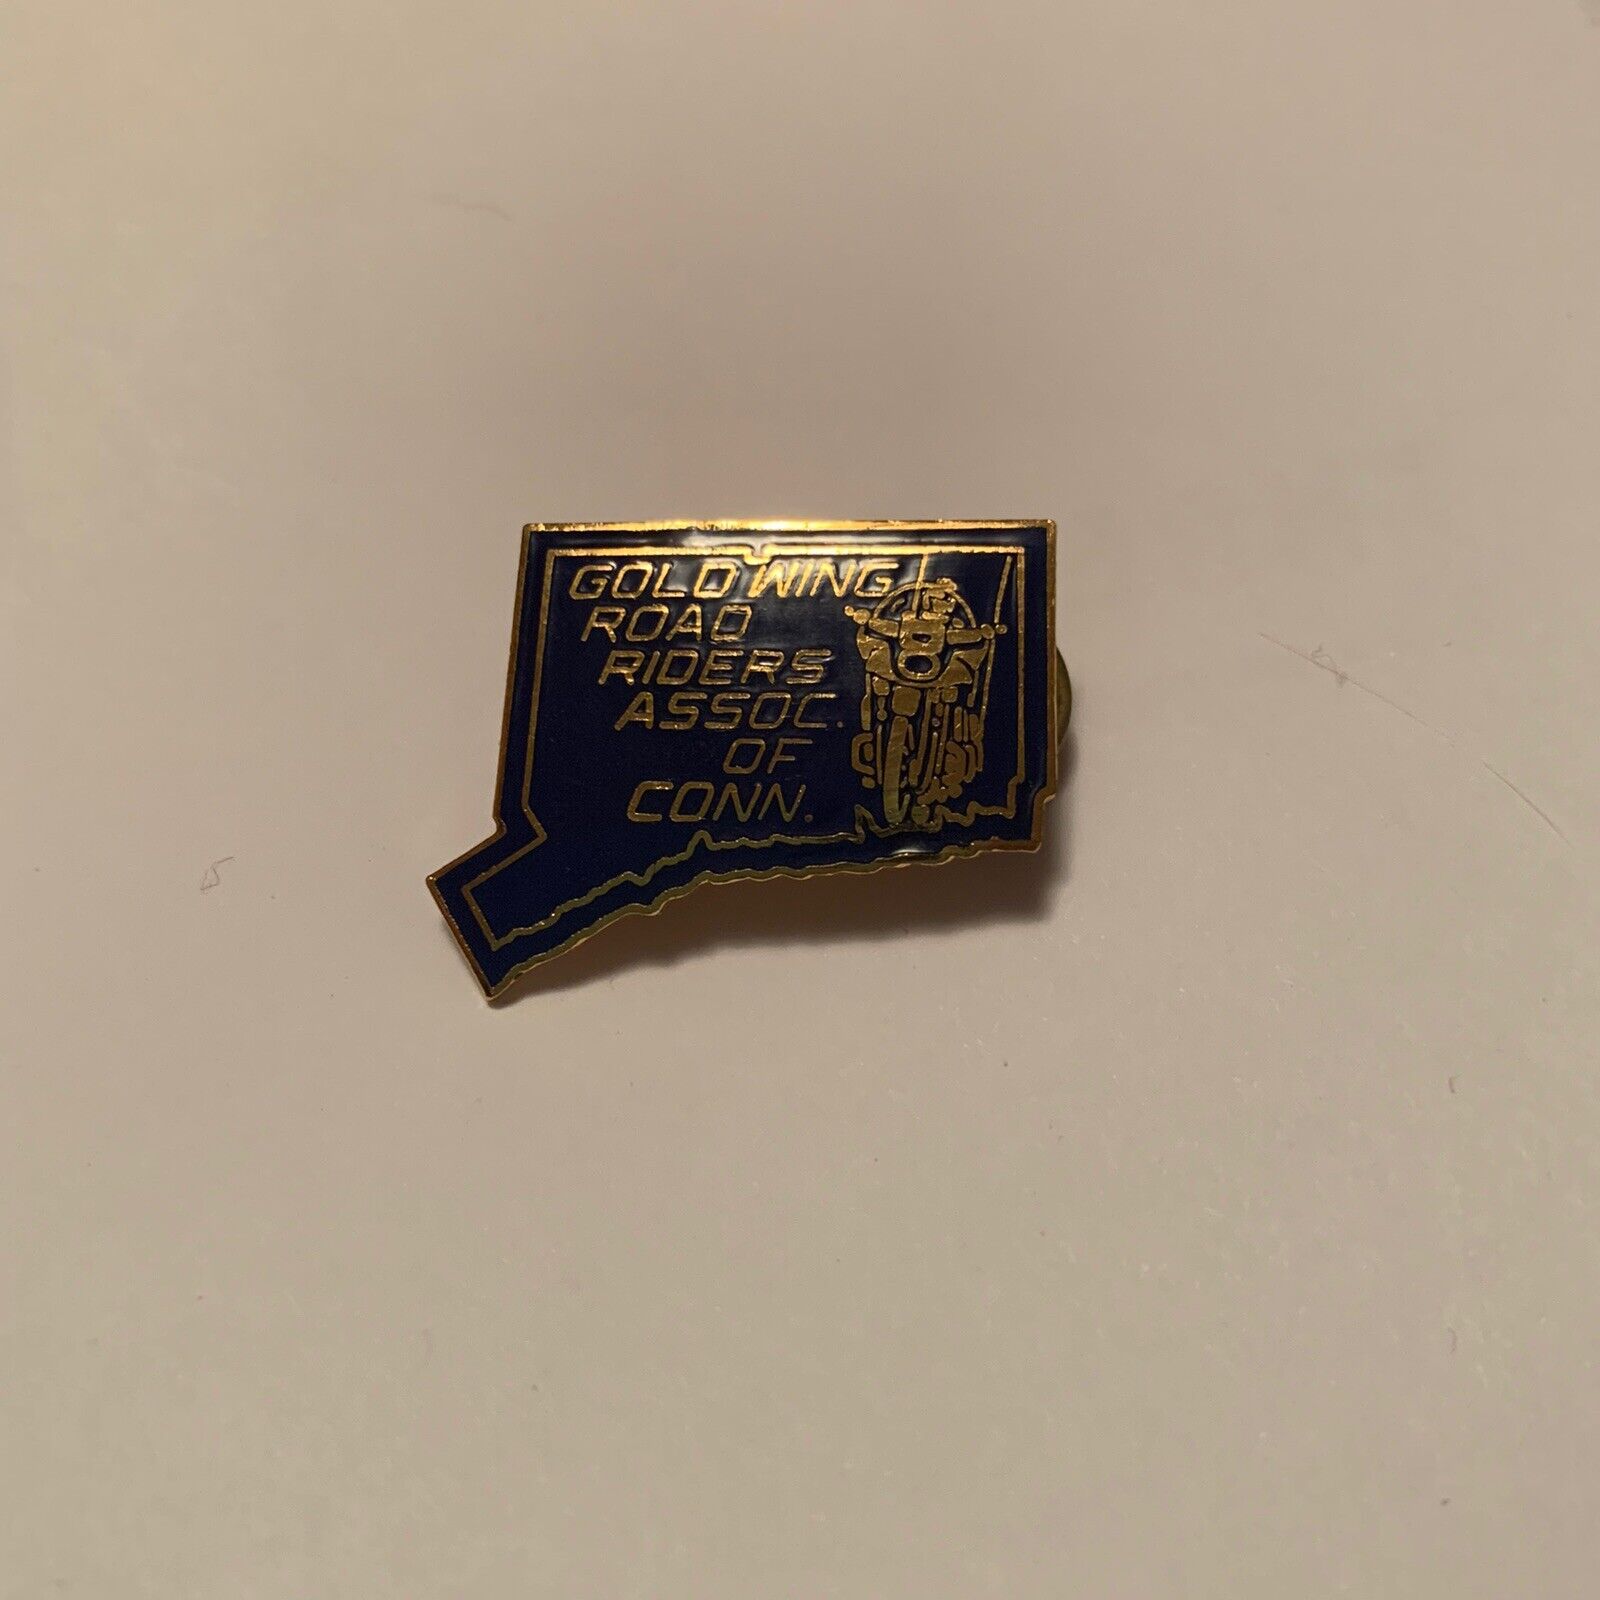 GWRRA Gold Wing Road Riders Association of Connecticut MOTORCYCLE Club lapel pin